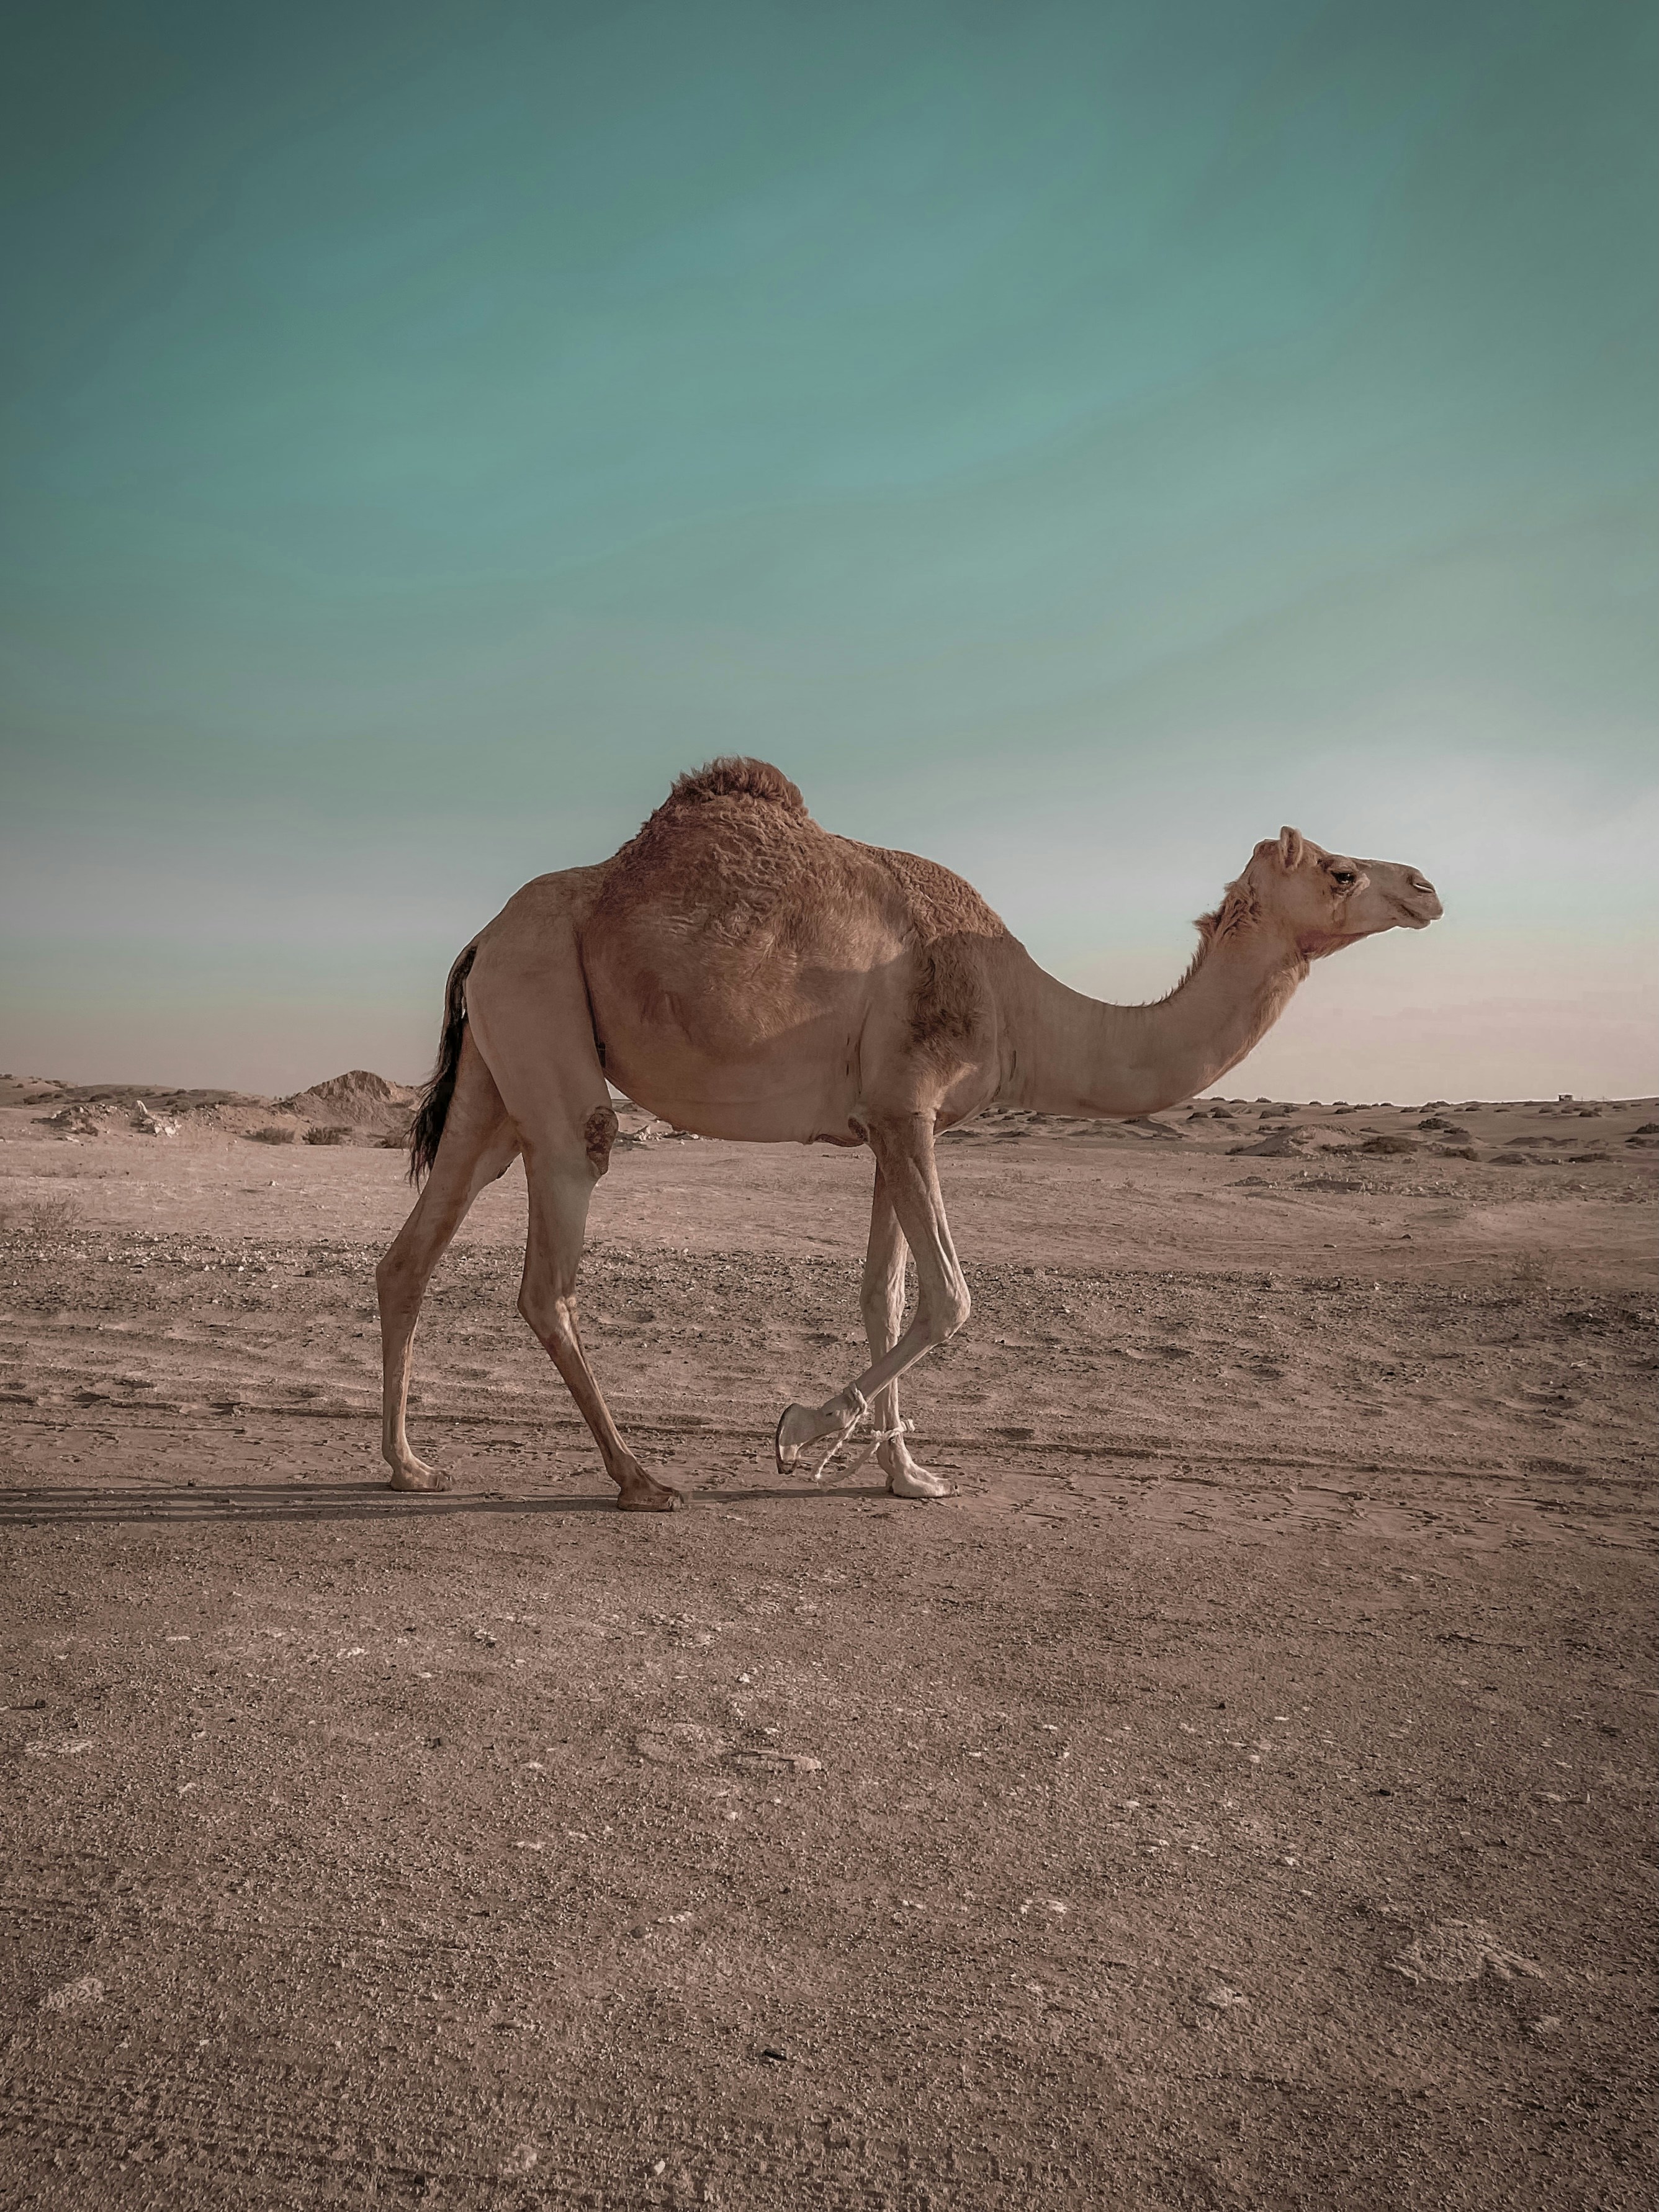 spot the camel in this optical illusion